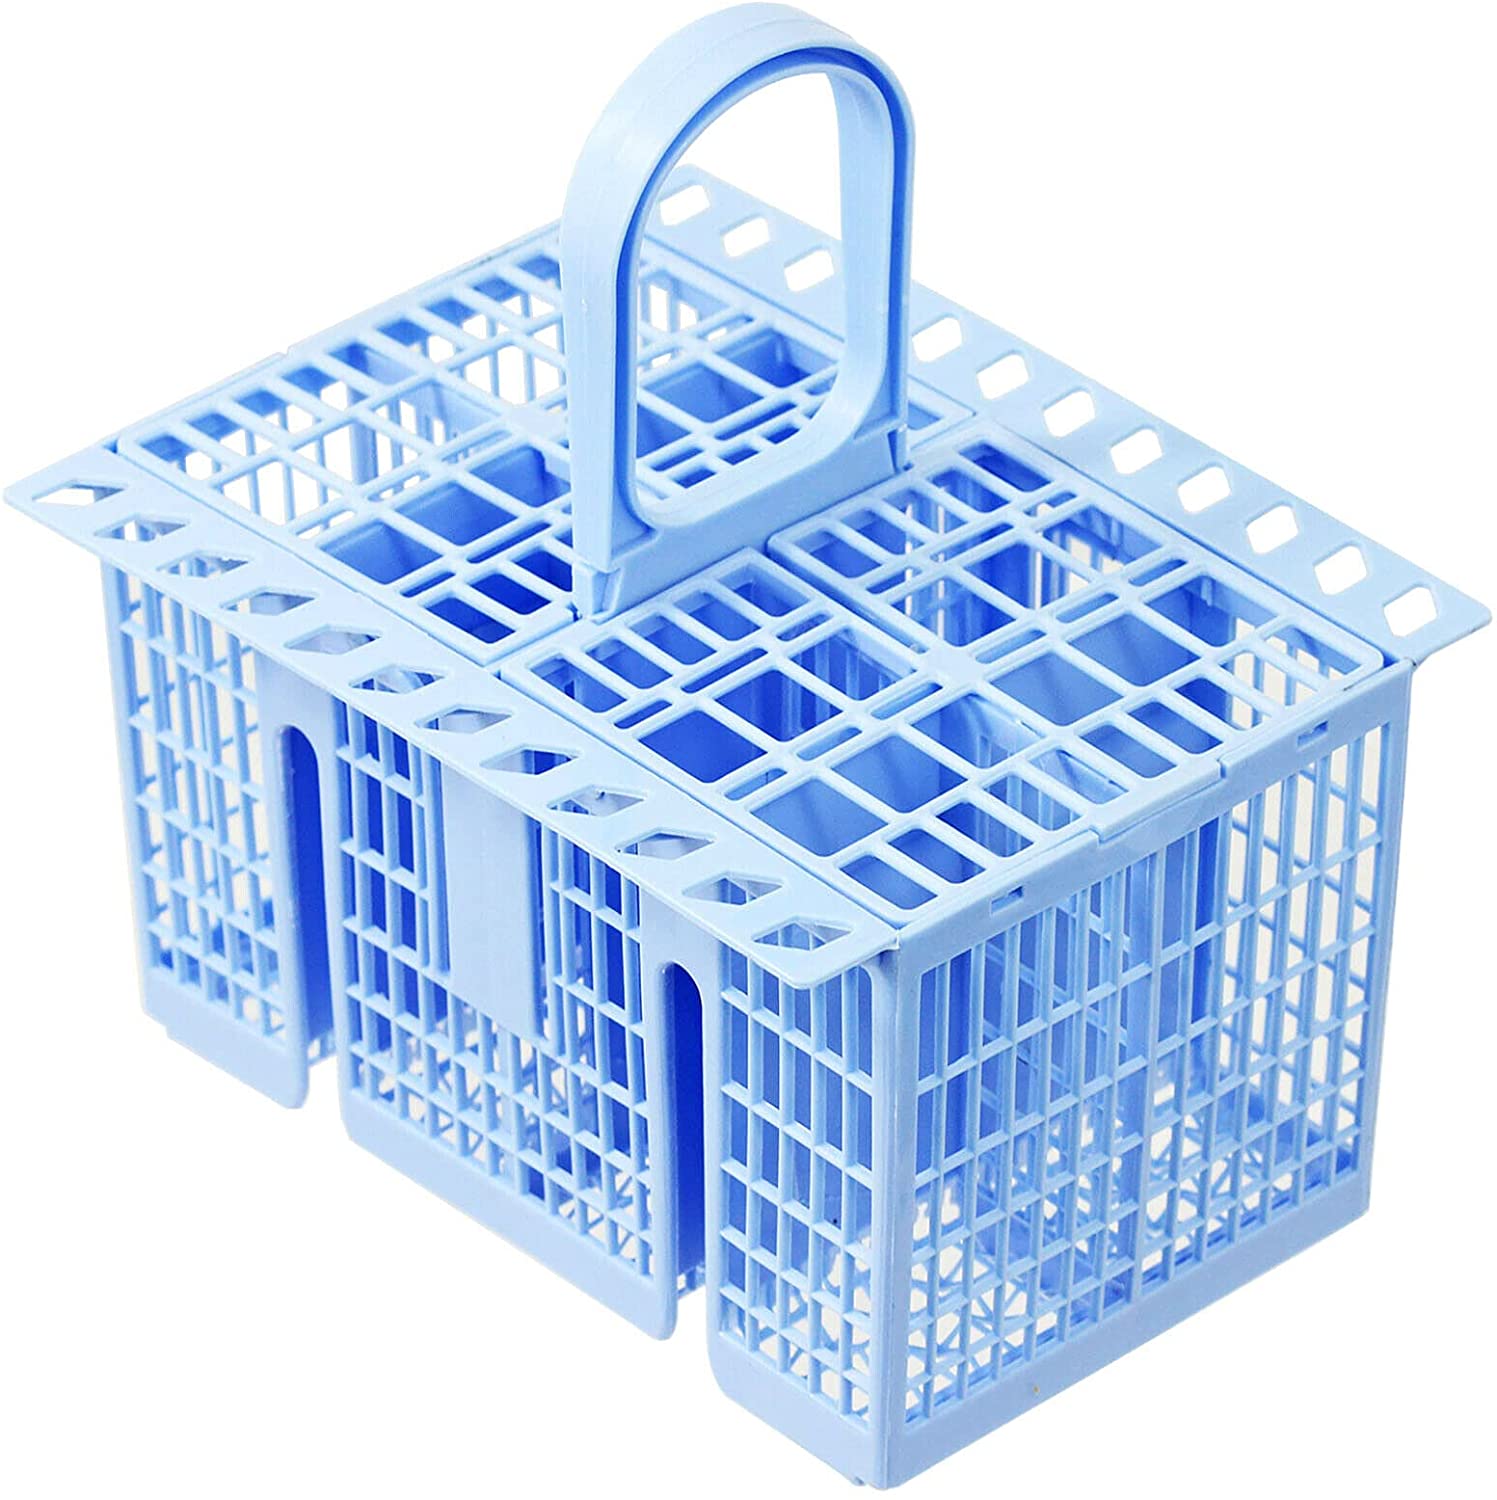 SPARES2GO Cutlery Basket compatible with Caple Dishwasher (Blue, 220 x 208 x 160mm)